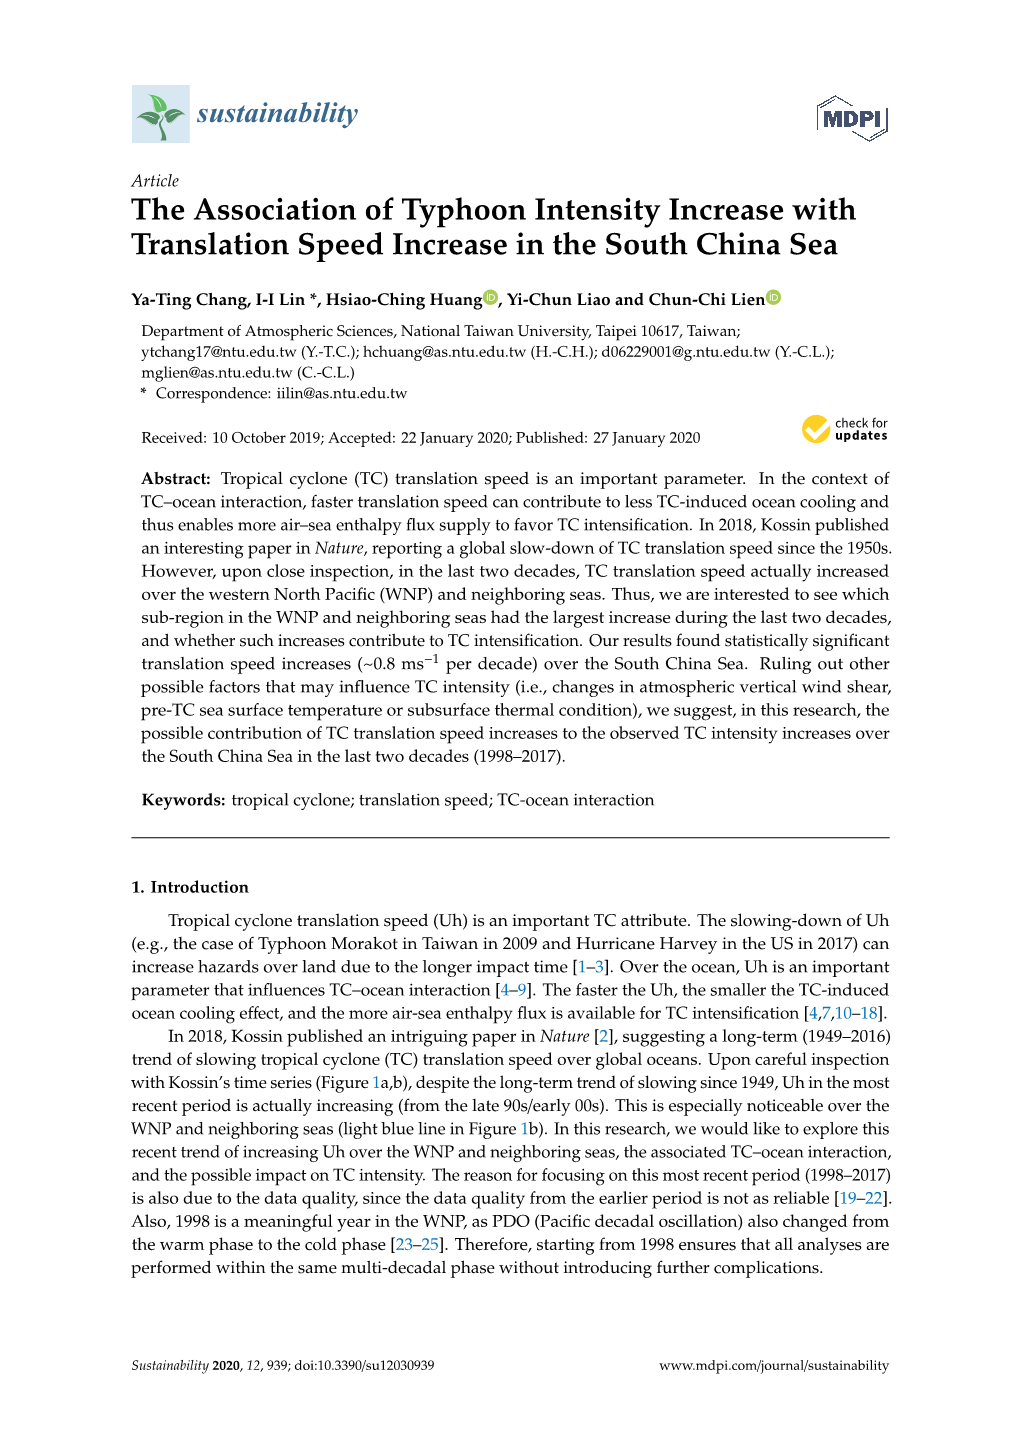 The Association of Typhoon Intensity Increase with Translation Speed Increase in the South China Sea